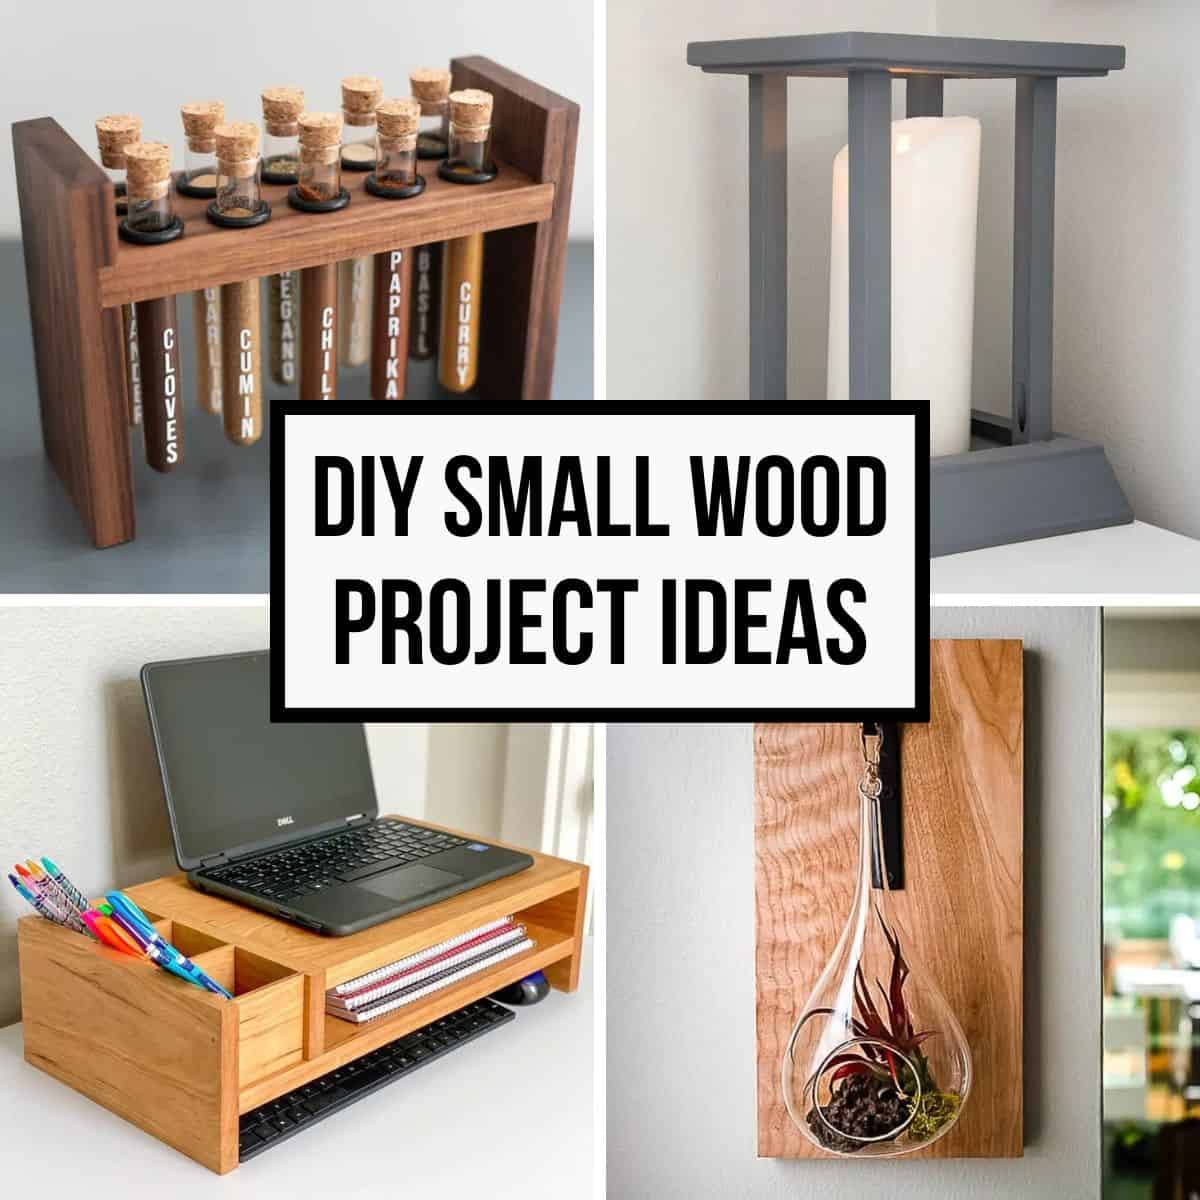 Modern woodworking projects